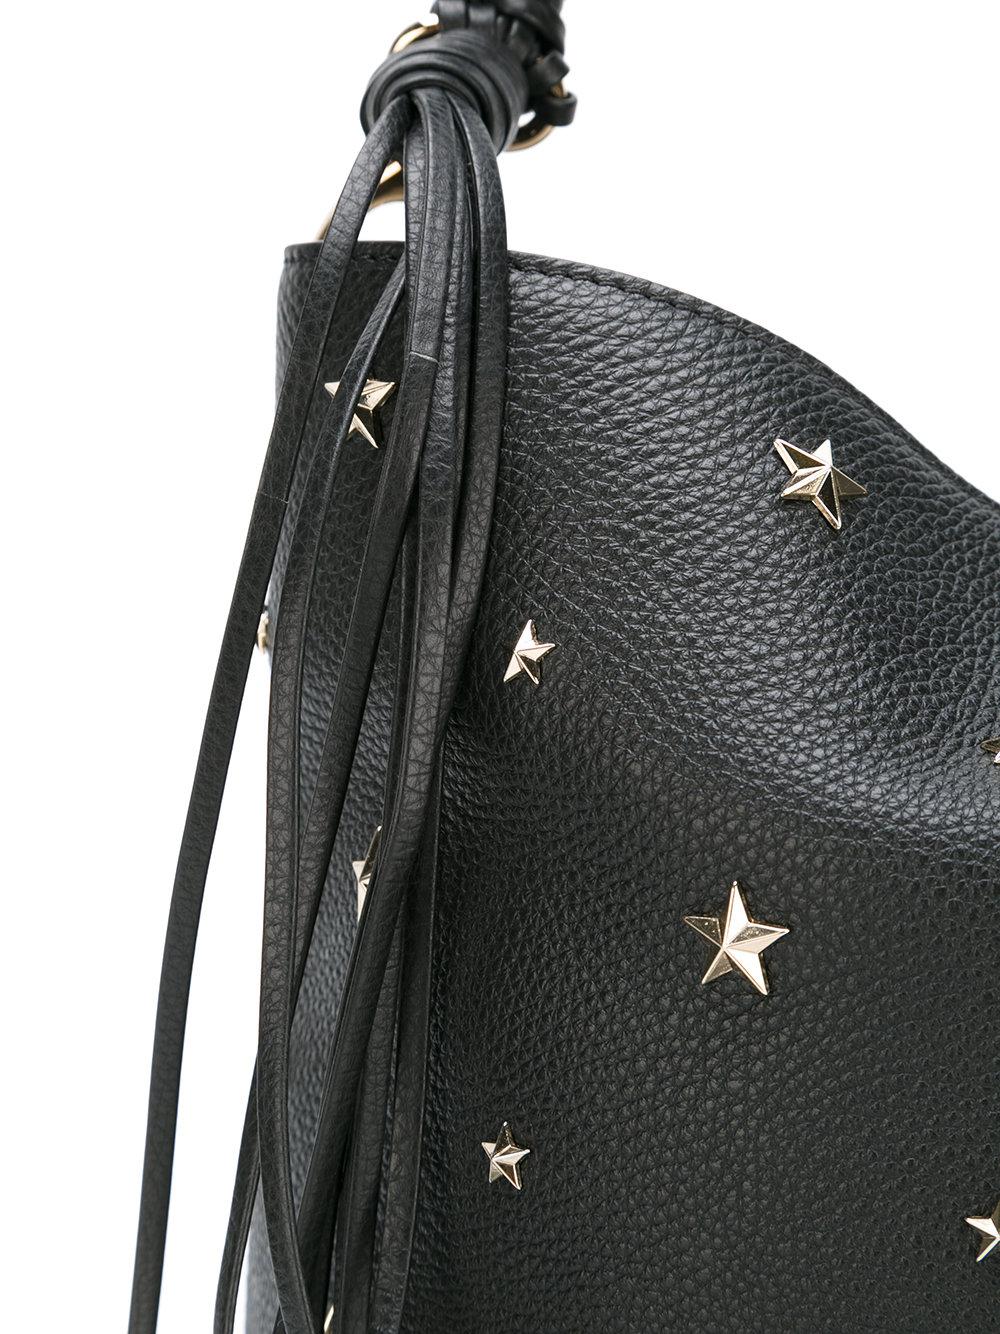 RED Valentino Leather Star Stud Tote in Black - Lyst